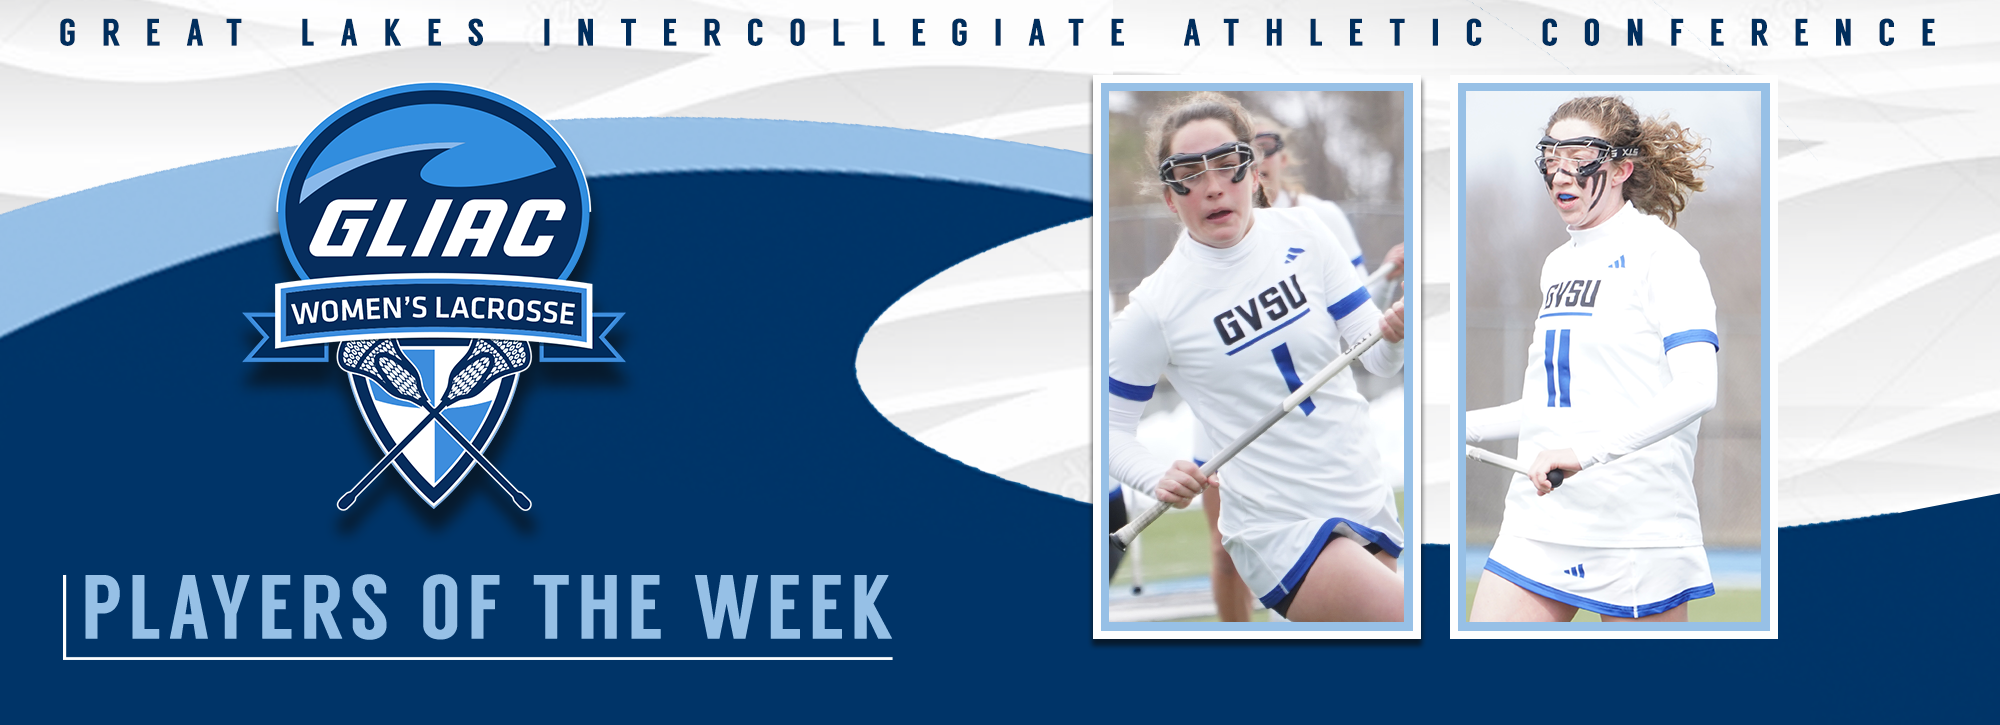 GVSU's Crittenden and Alkire named GLIAC Women's Lacrosse Players of the Week